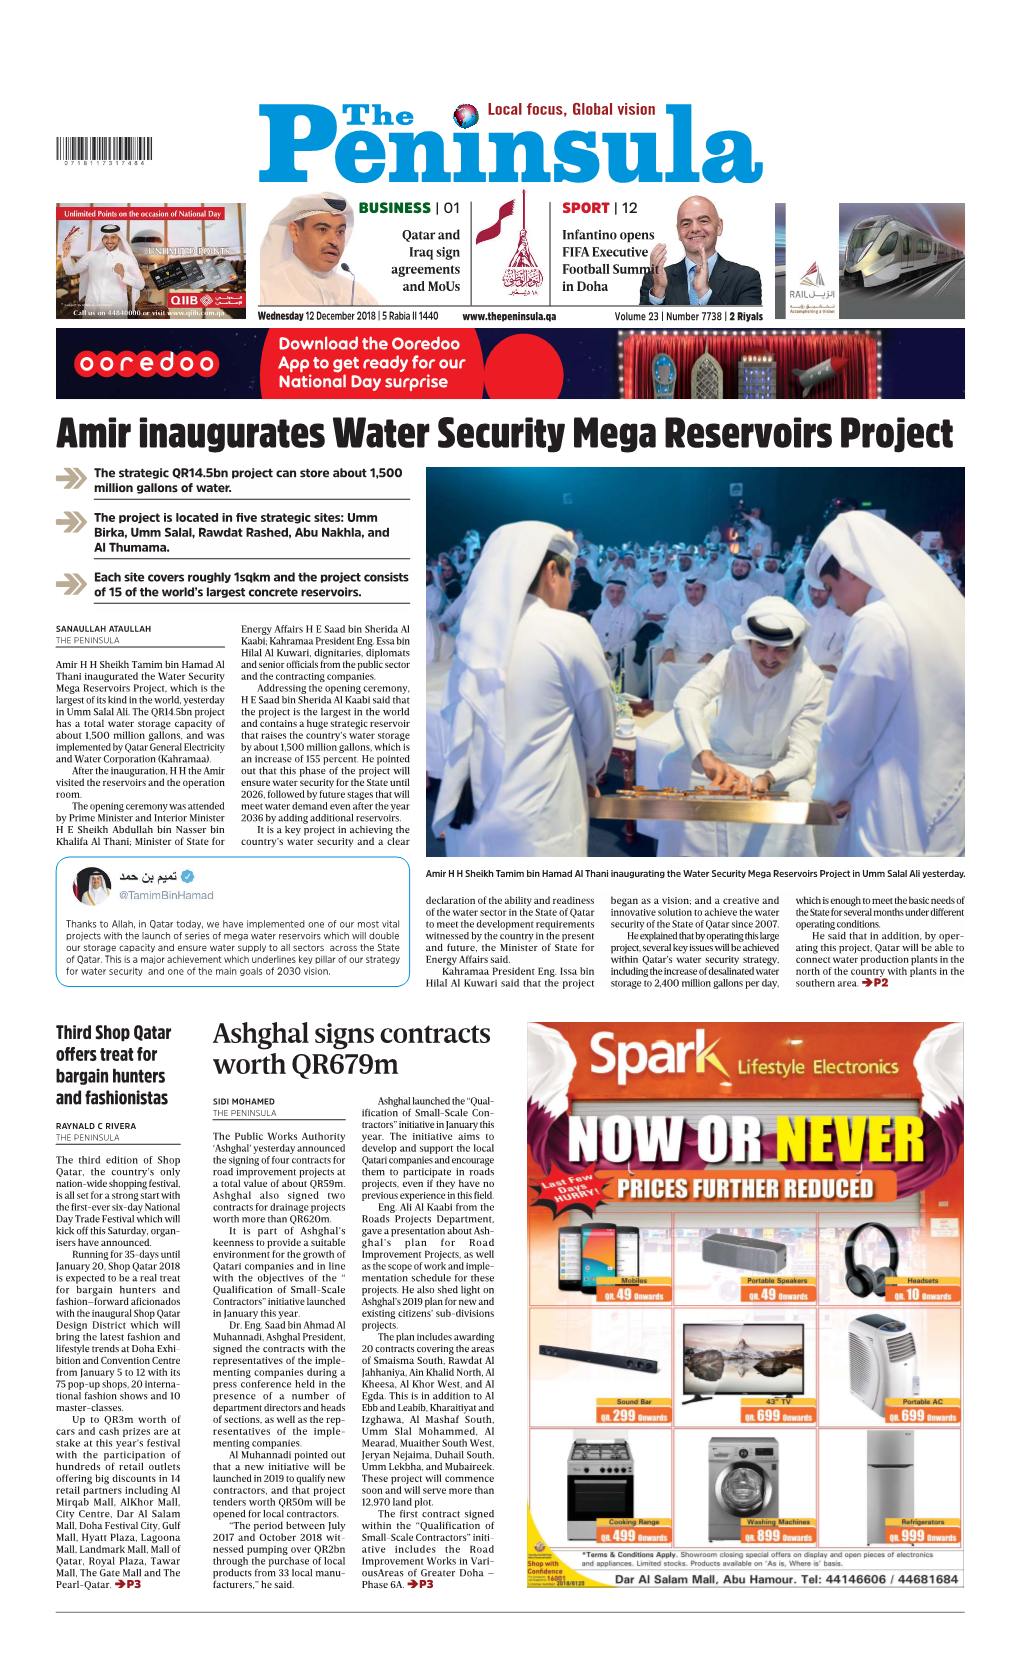 Amir Inaugurates Water Security Mega Reservoirs Project